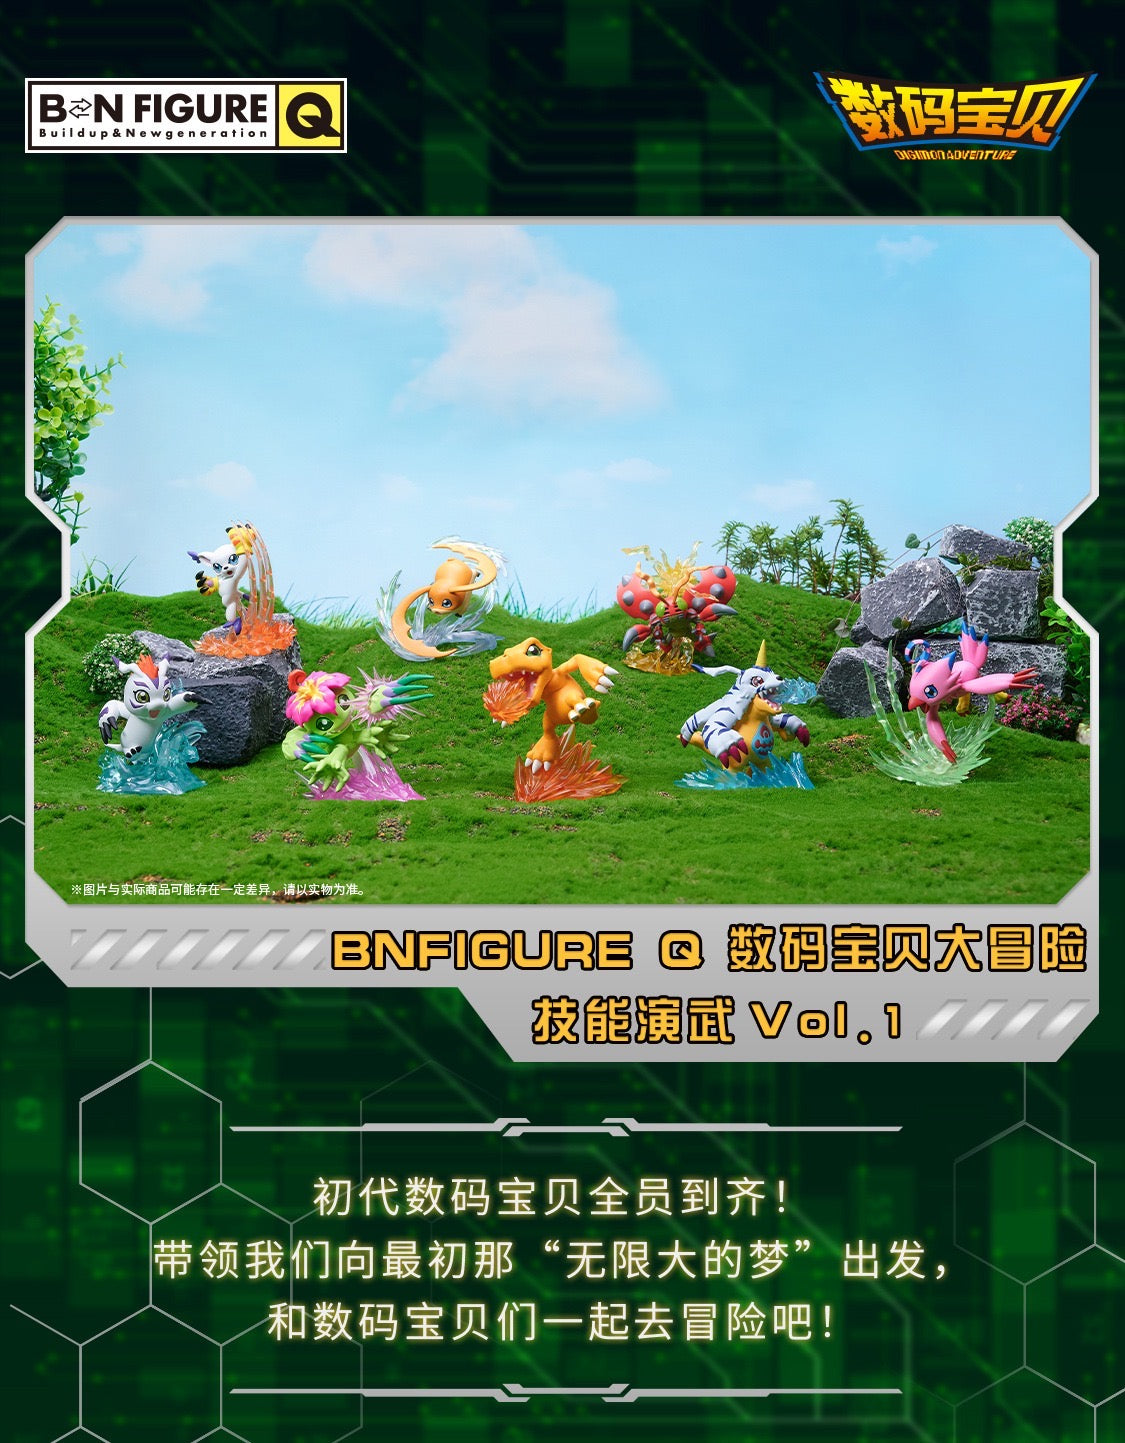 Digimon Adventure Digital Monster Fighting Version - Anime Collectable Toys Mystery Blind Box